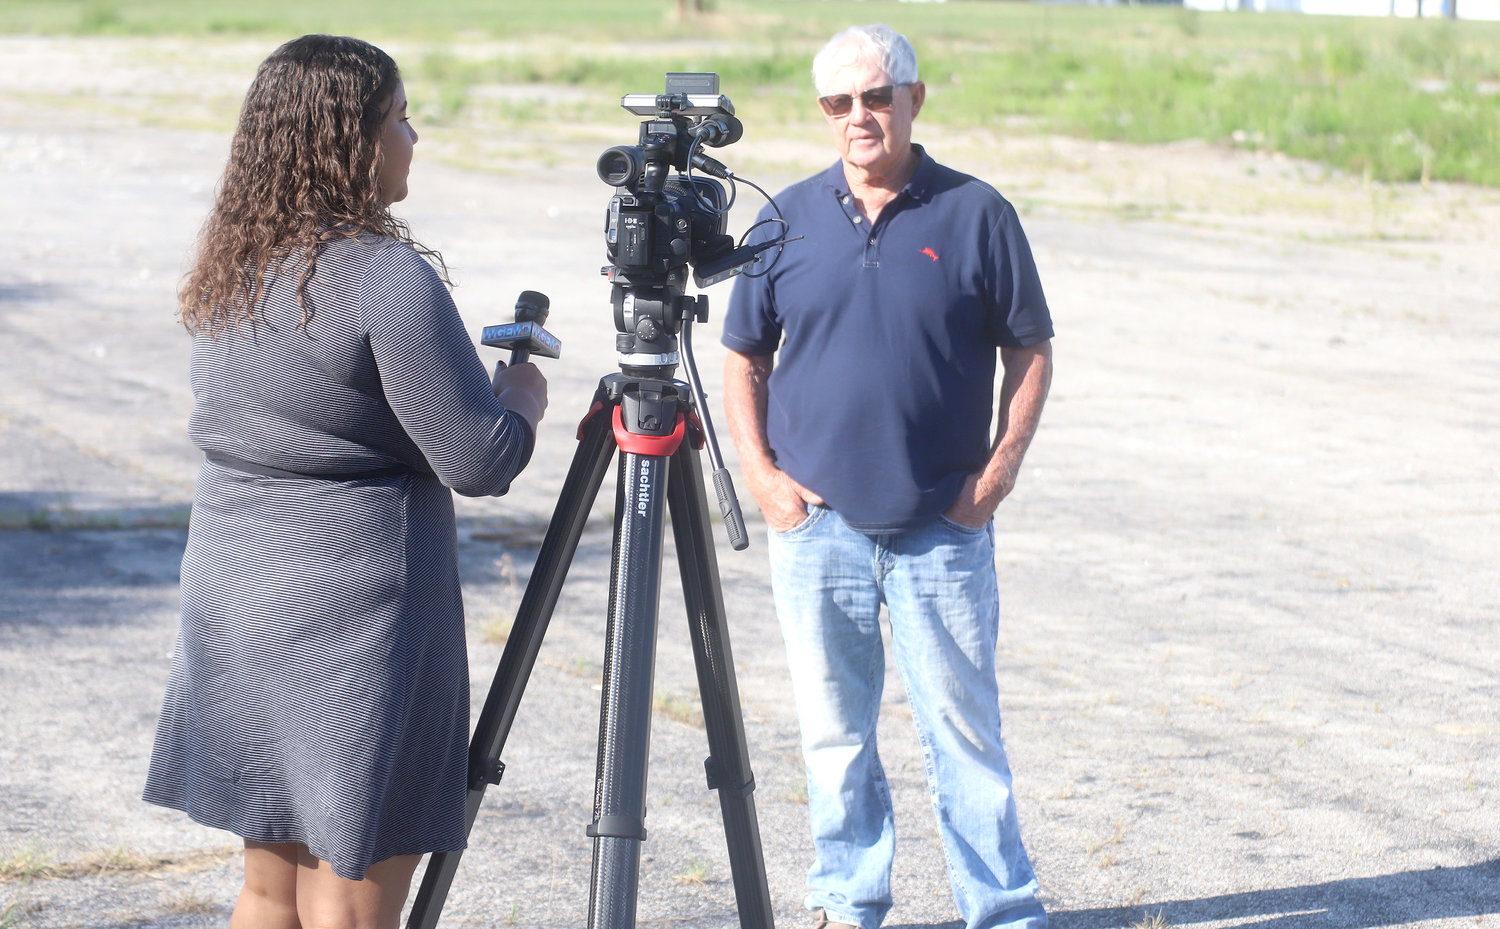 Fort Madison's Glen Meller, of Circle M, Inc, speaks with WGEM reporter Shaqaille McCamick Thursday morning at the site of about 10 acres of property Meller donated to the county for services including a new Lee County Health Department.